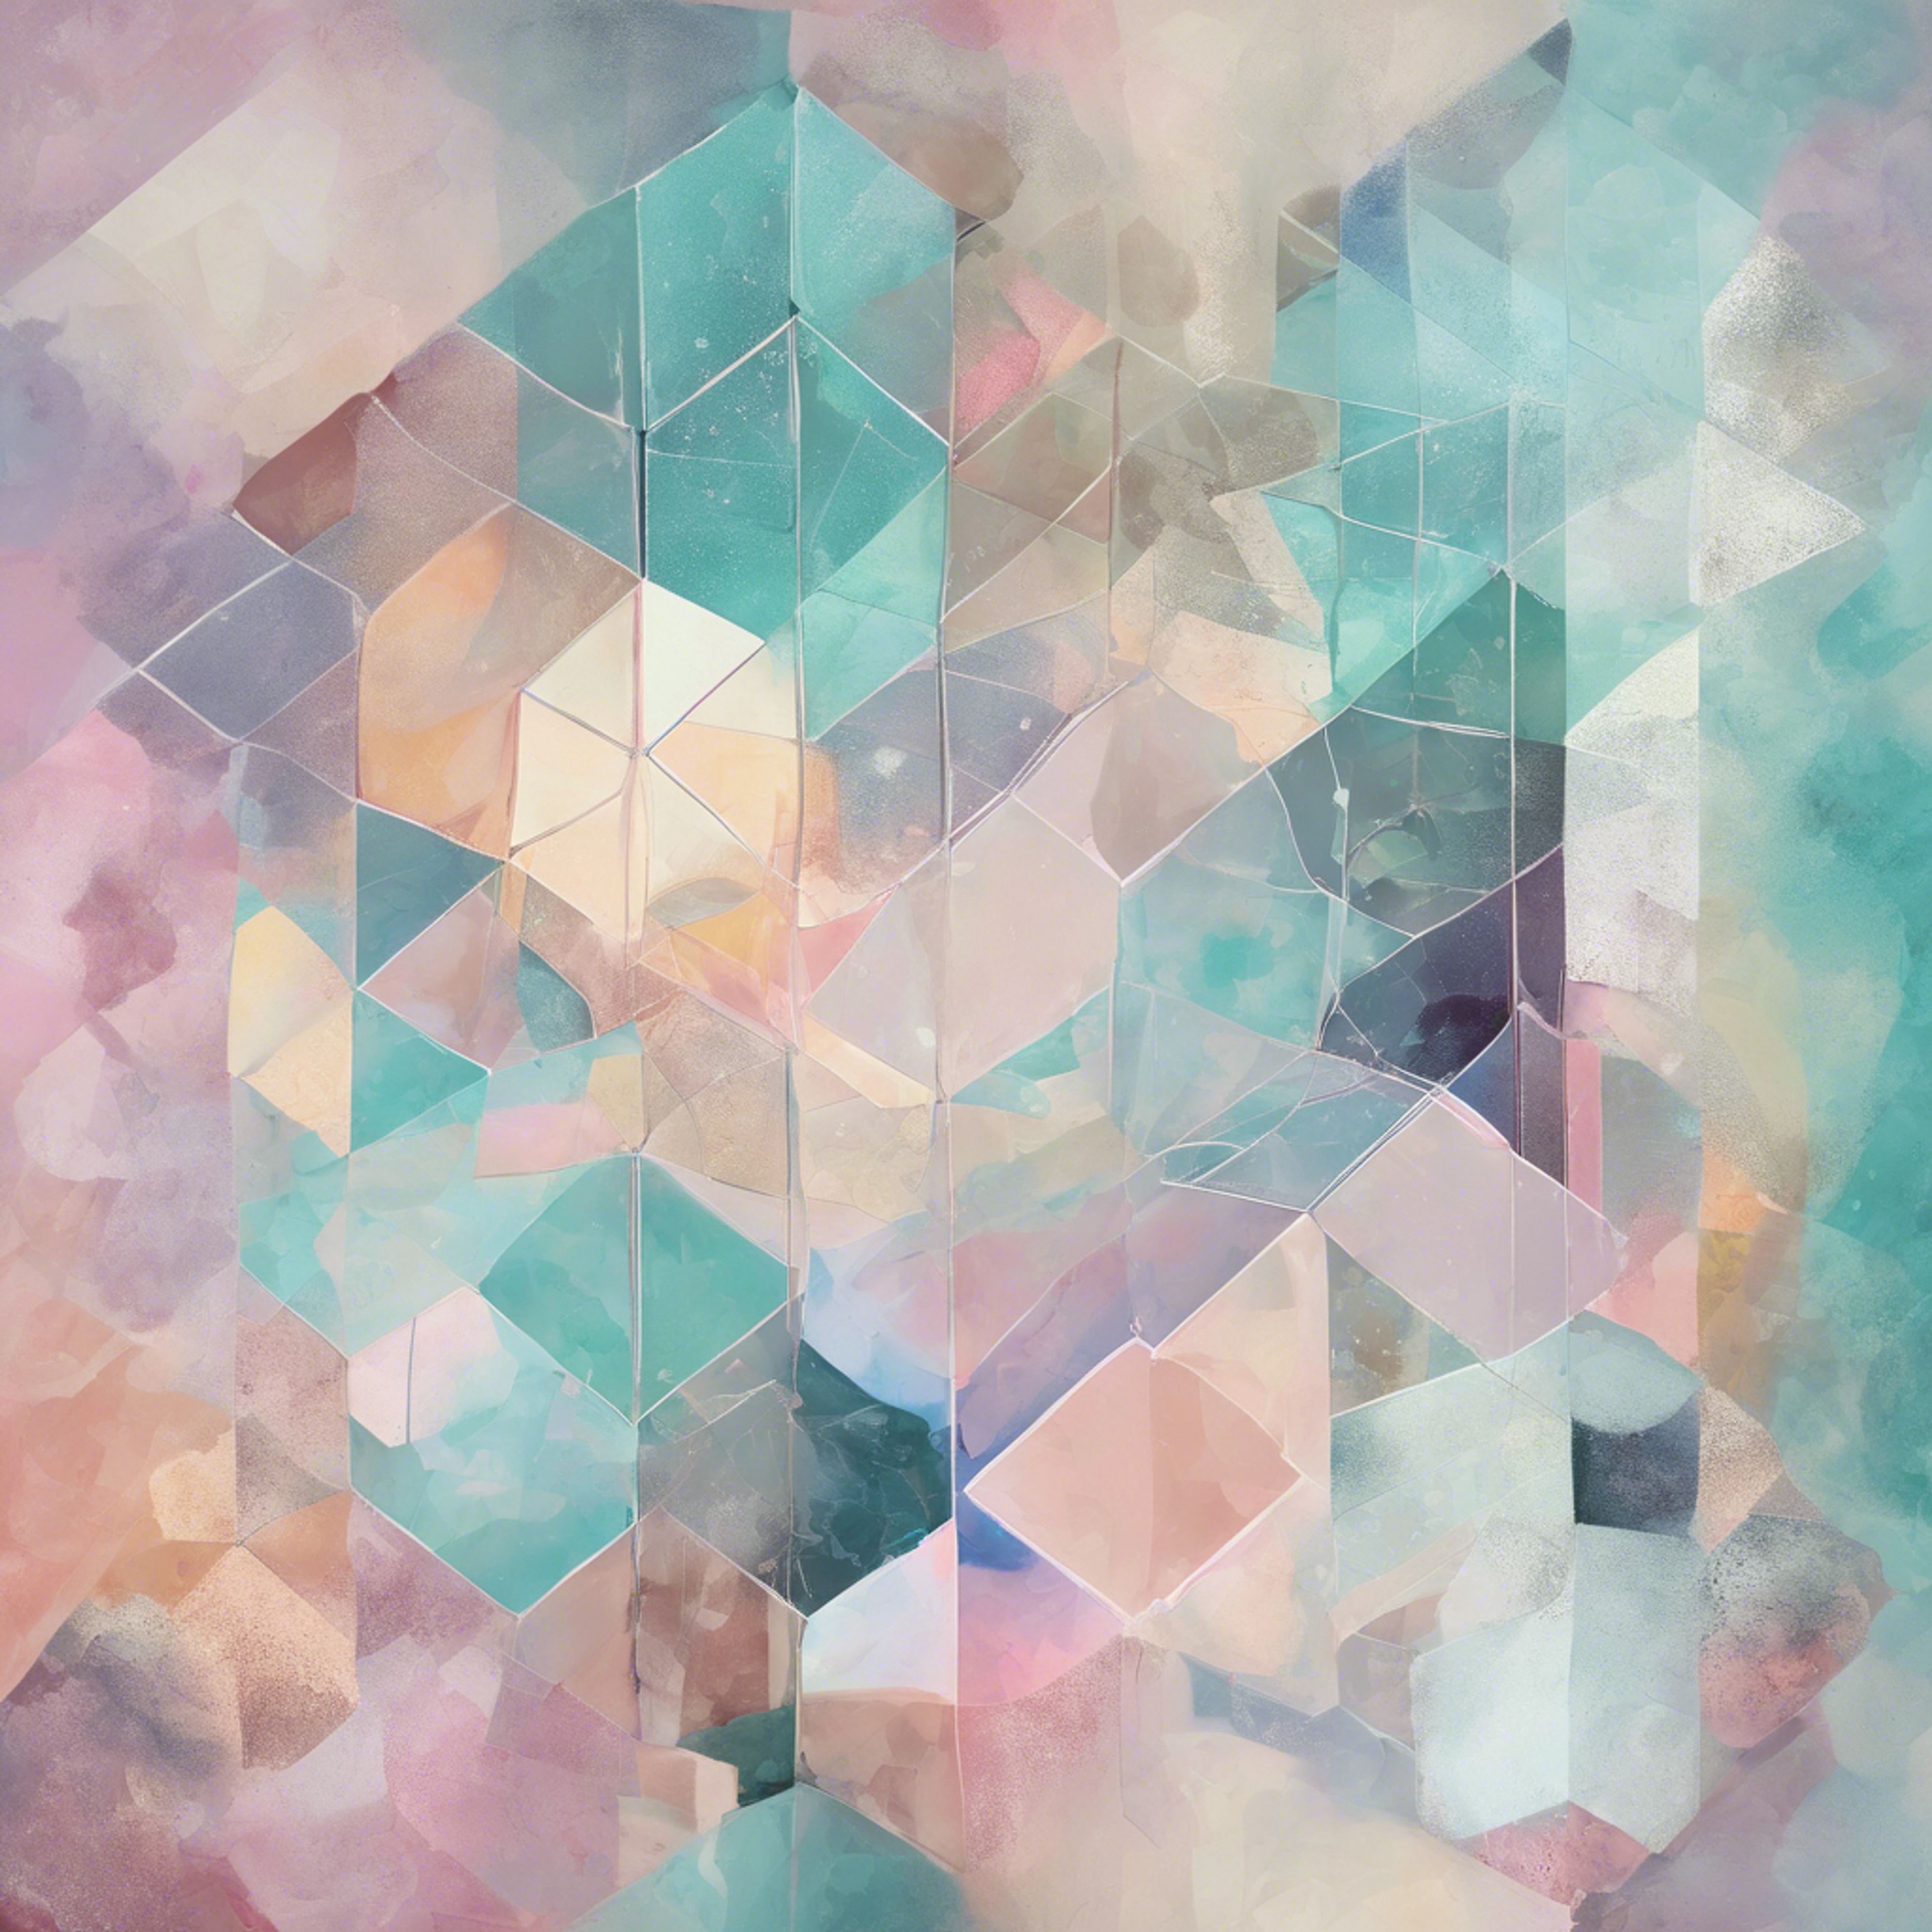 A cool pastel colored abstract painting emphasizing geometric patterns. Тапет[4610bdb5de564f779c91]